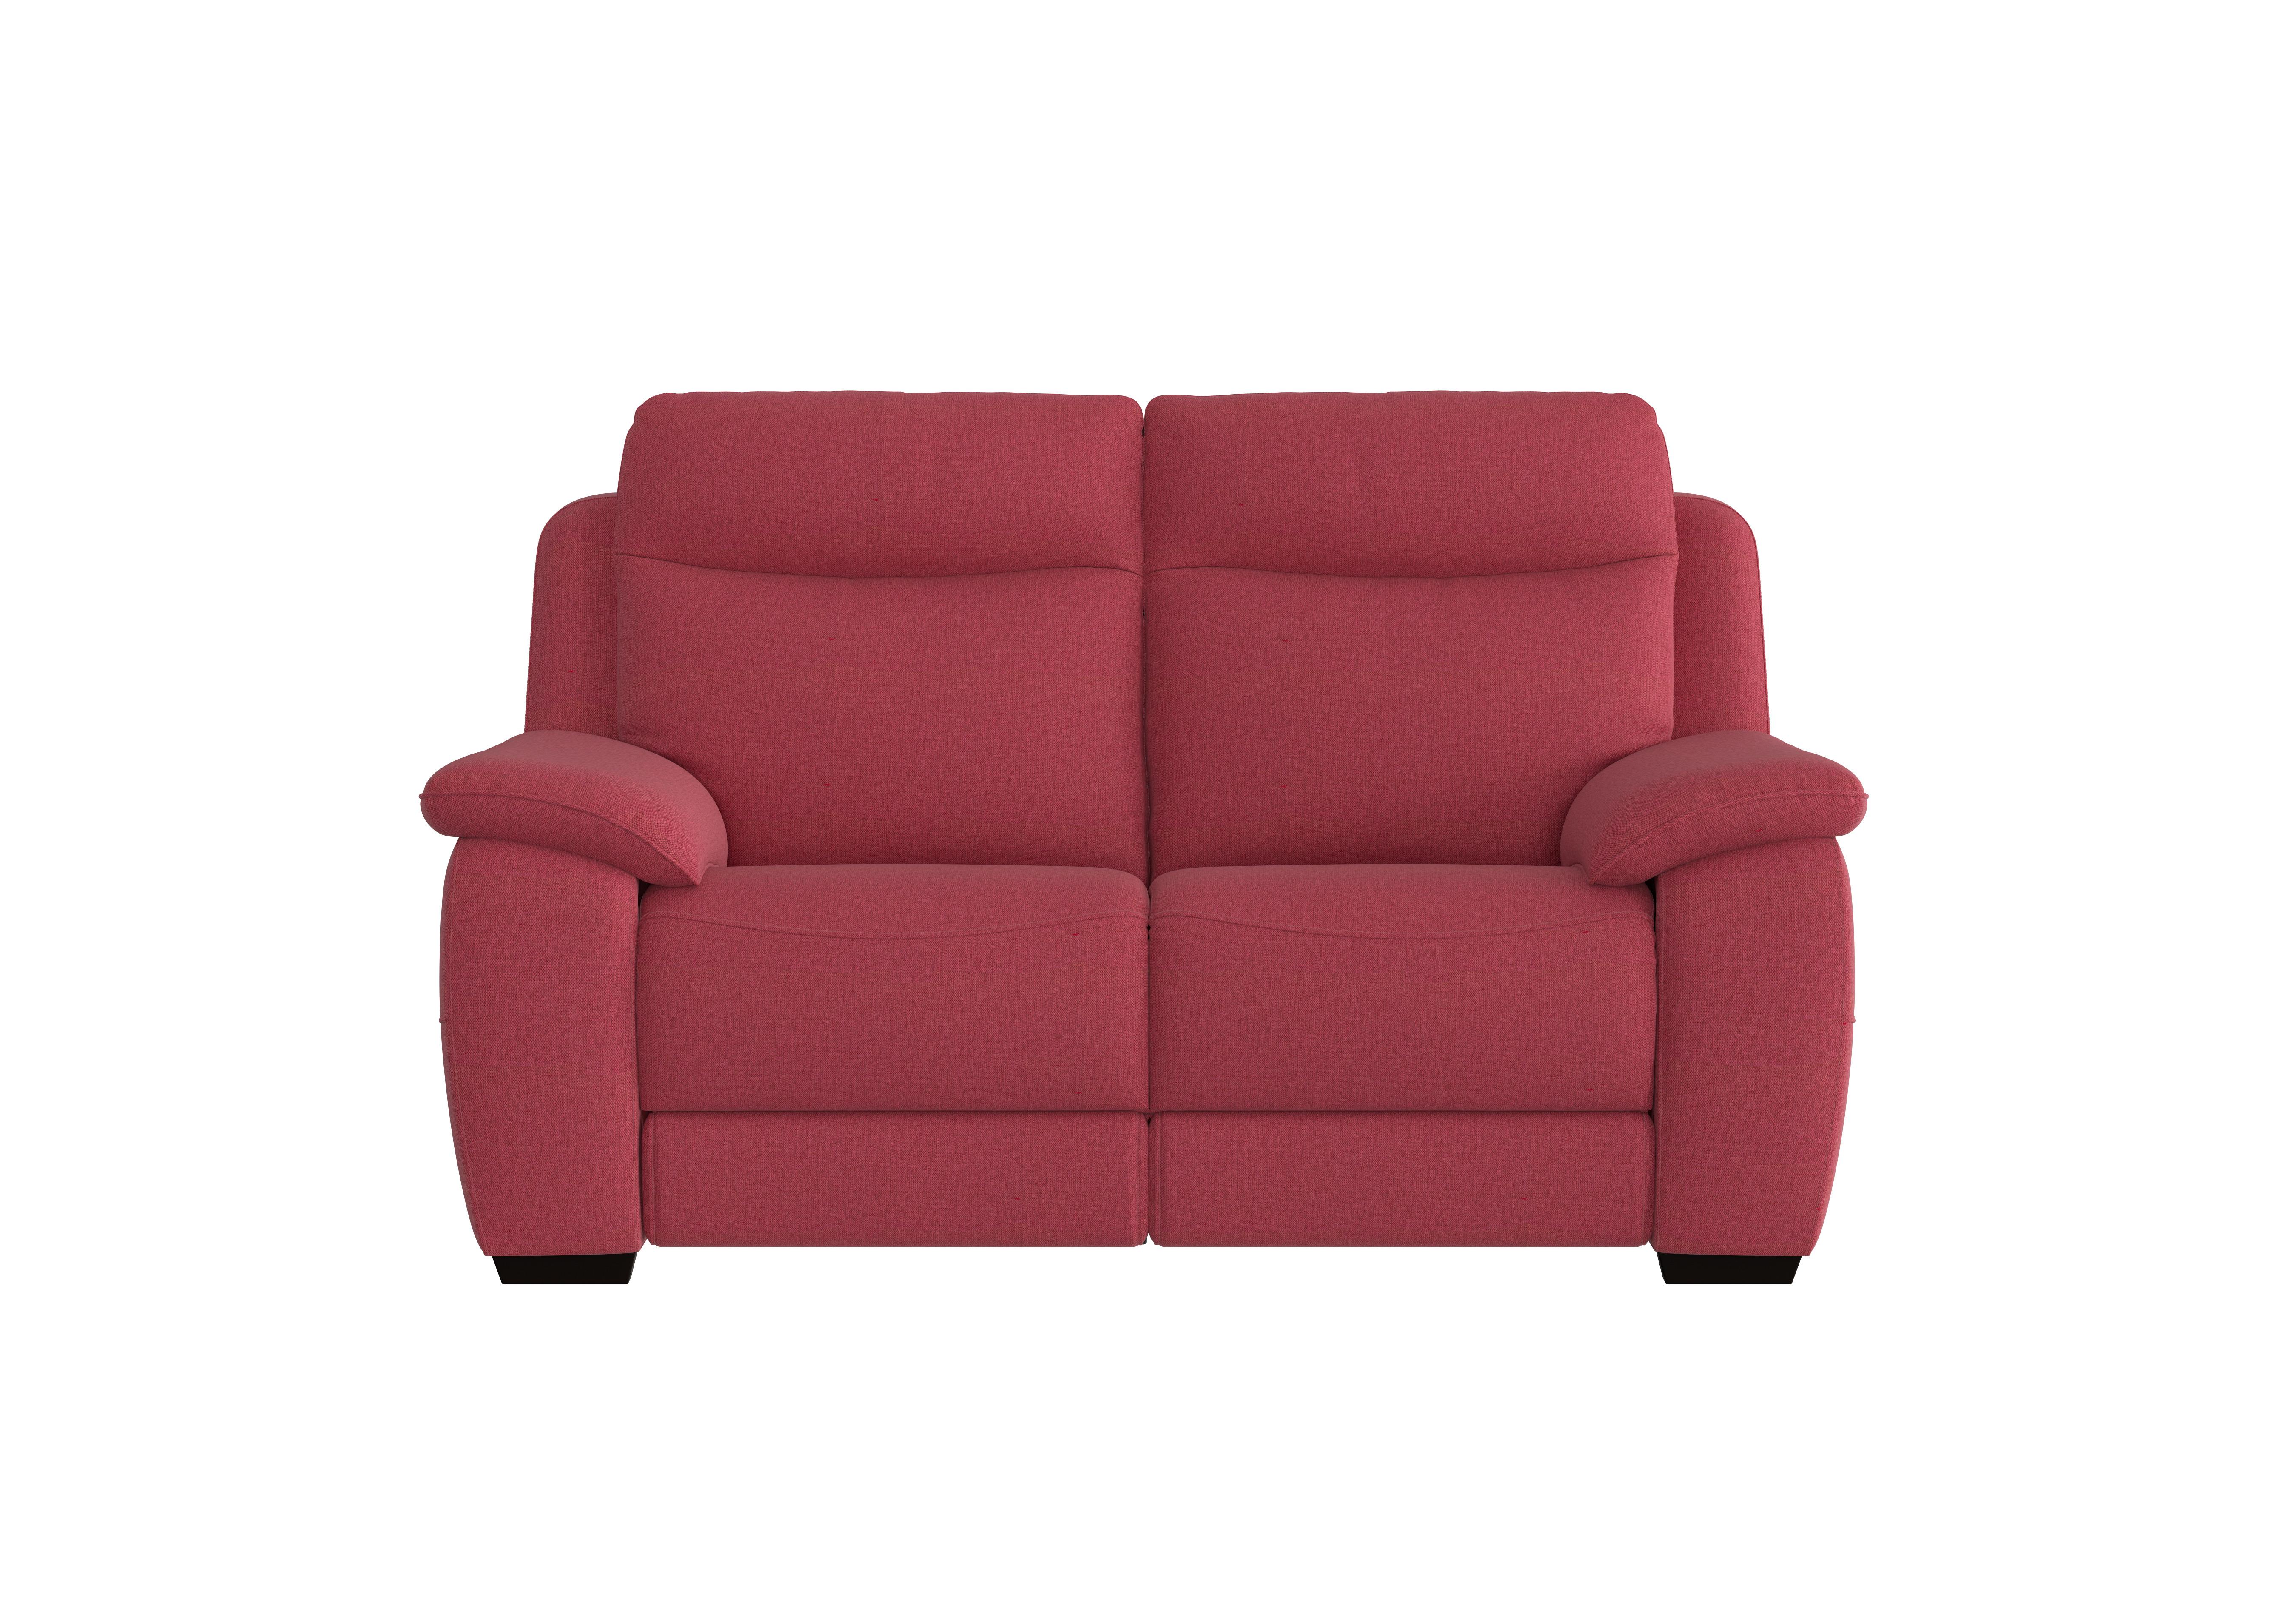 Starlight Express 2 Seater Fabric Recliner Sofa with Power Headrests in Fab-Blt-R29 Red on Furniture Village